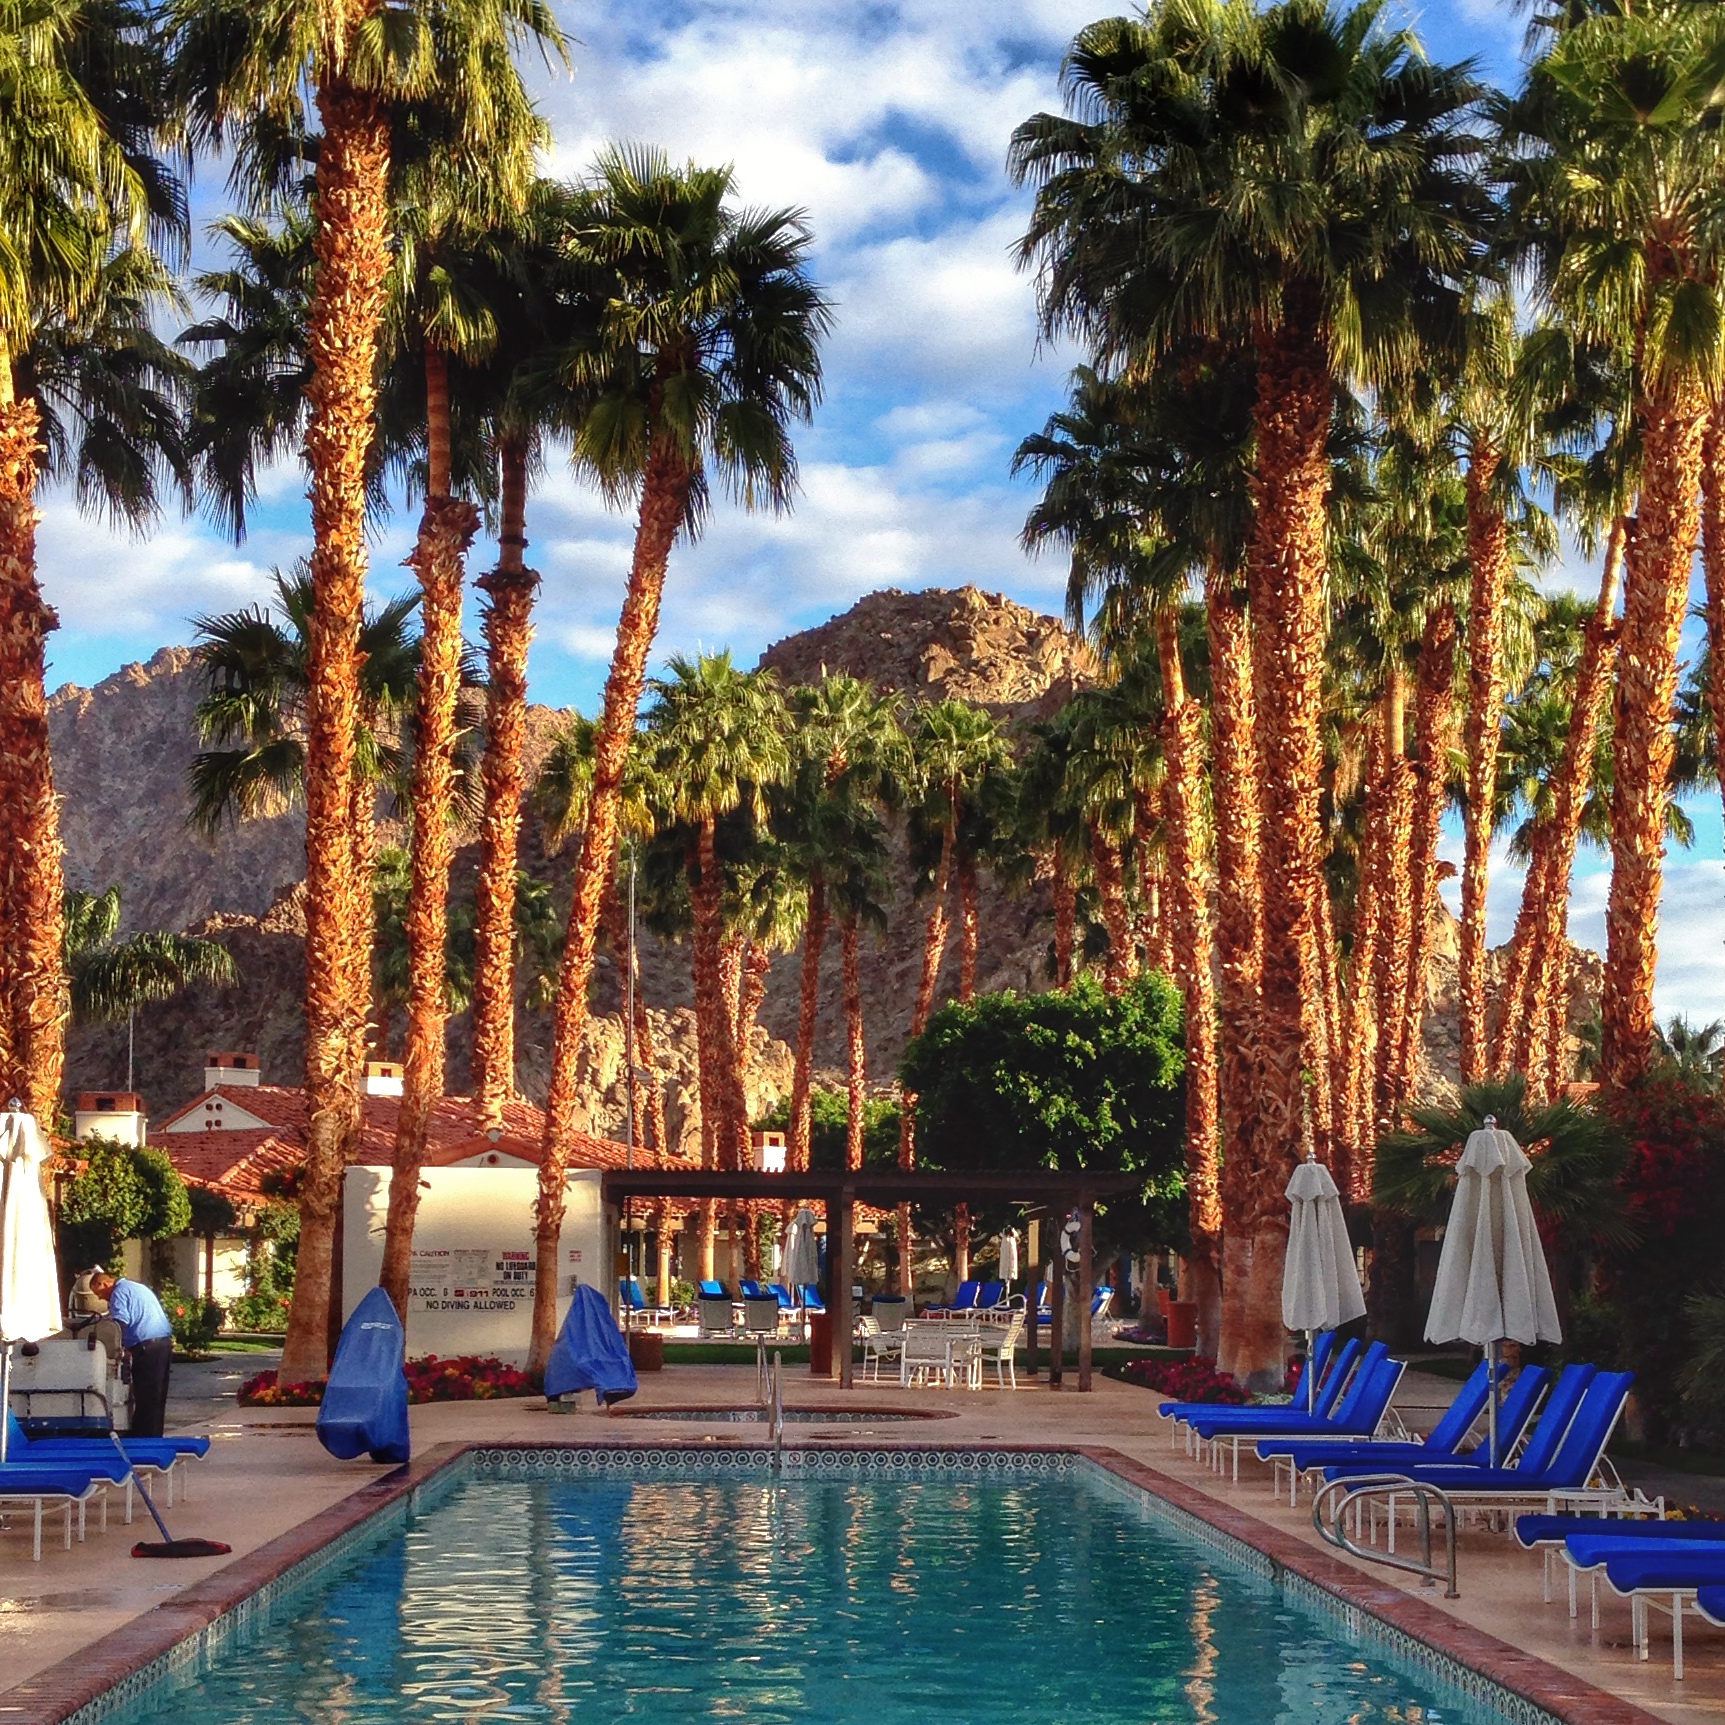 Where to stay with kids in Palm Springs